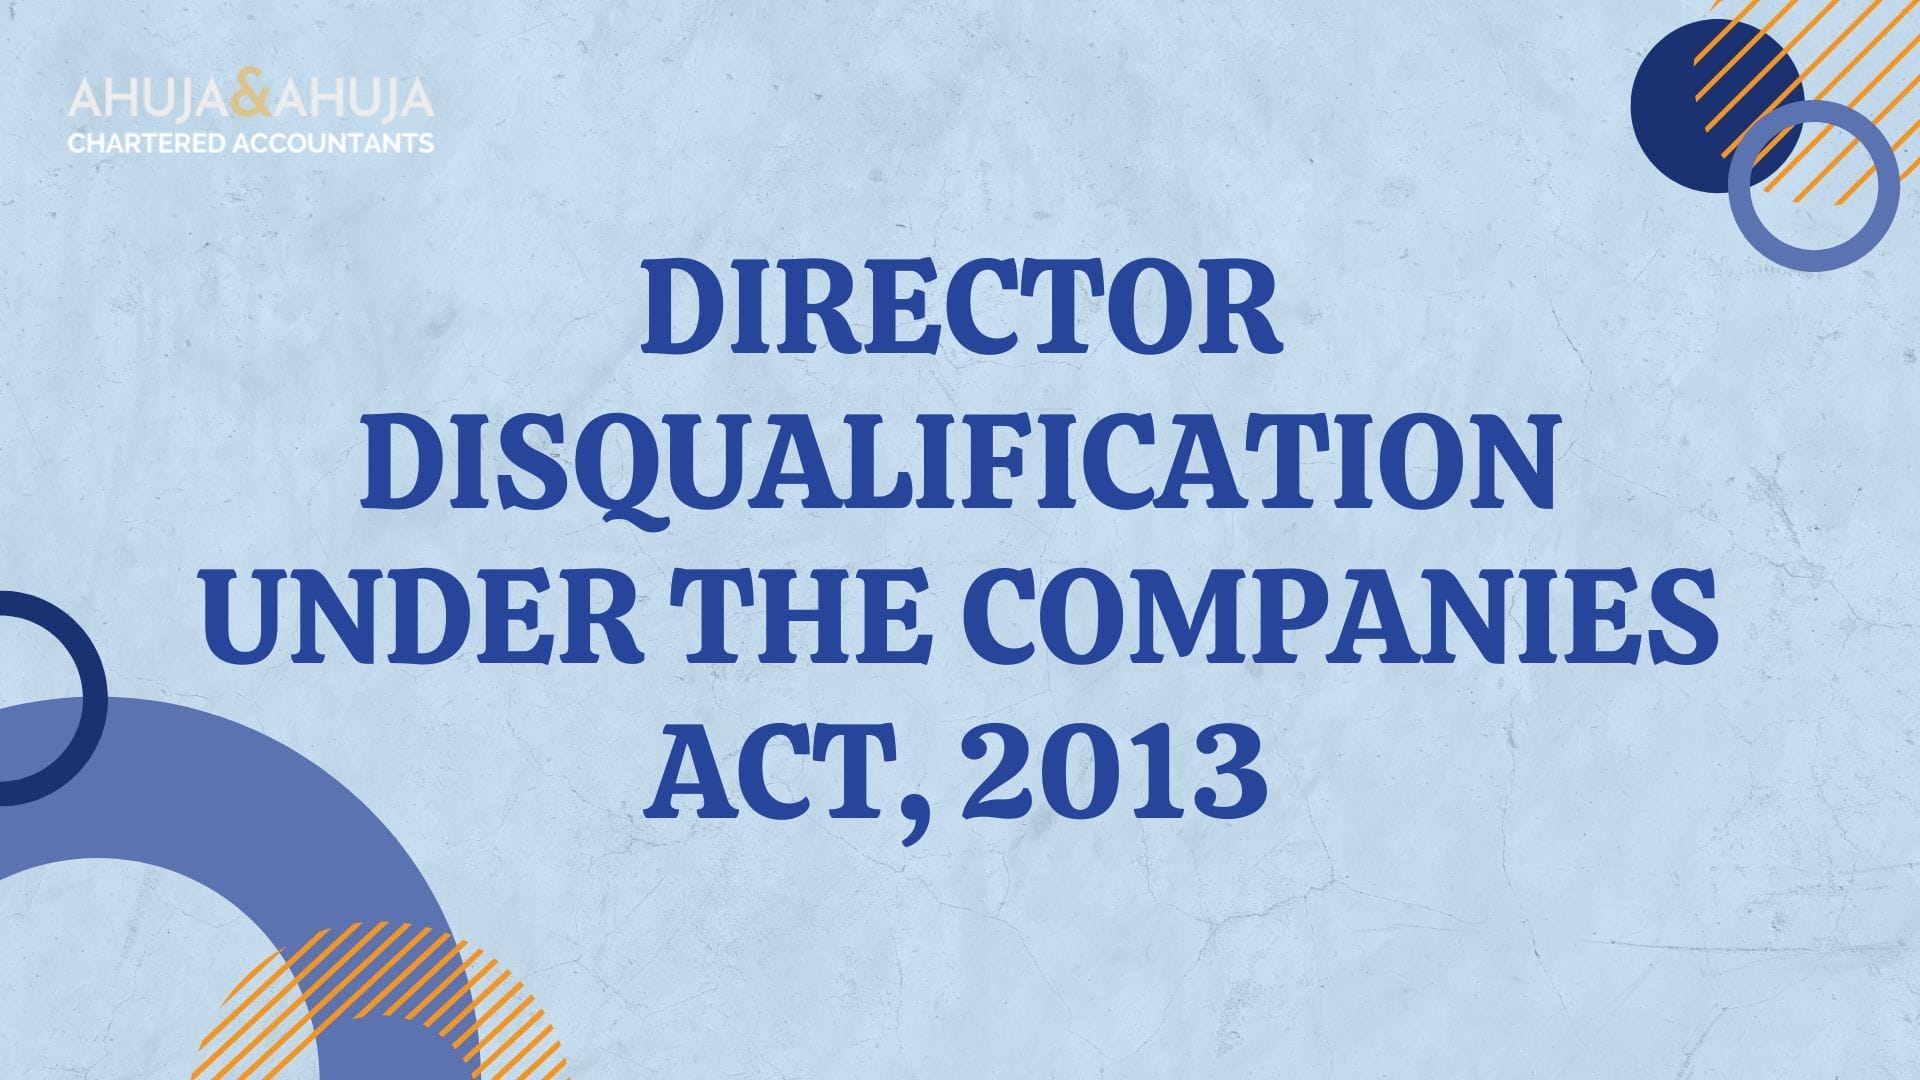 Director Disqualification under the Companies Act, 2013